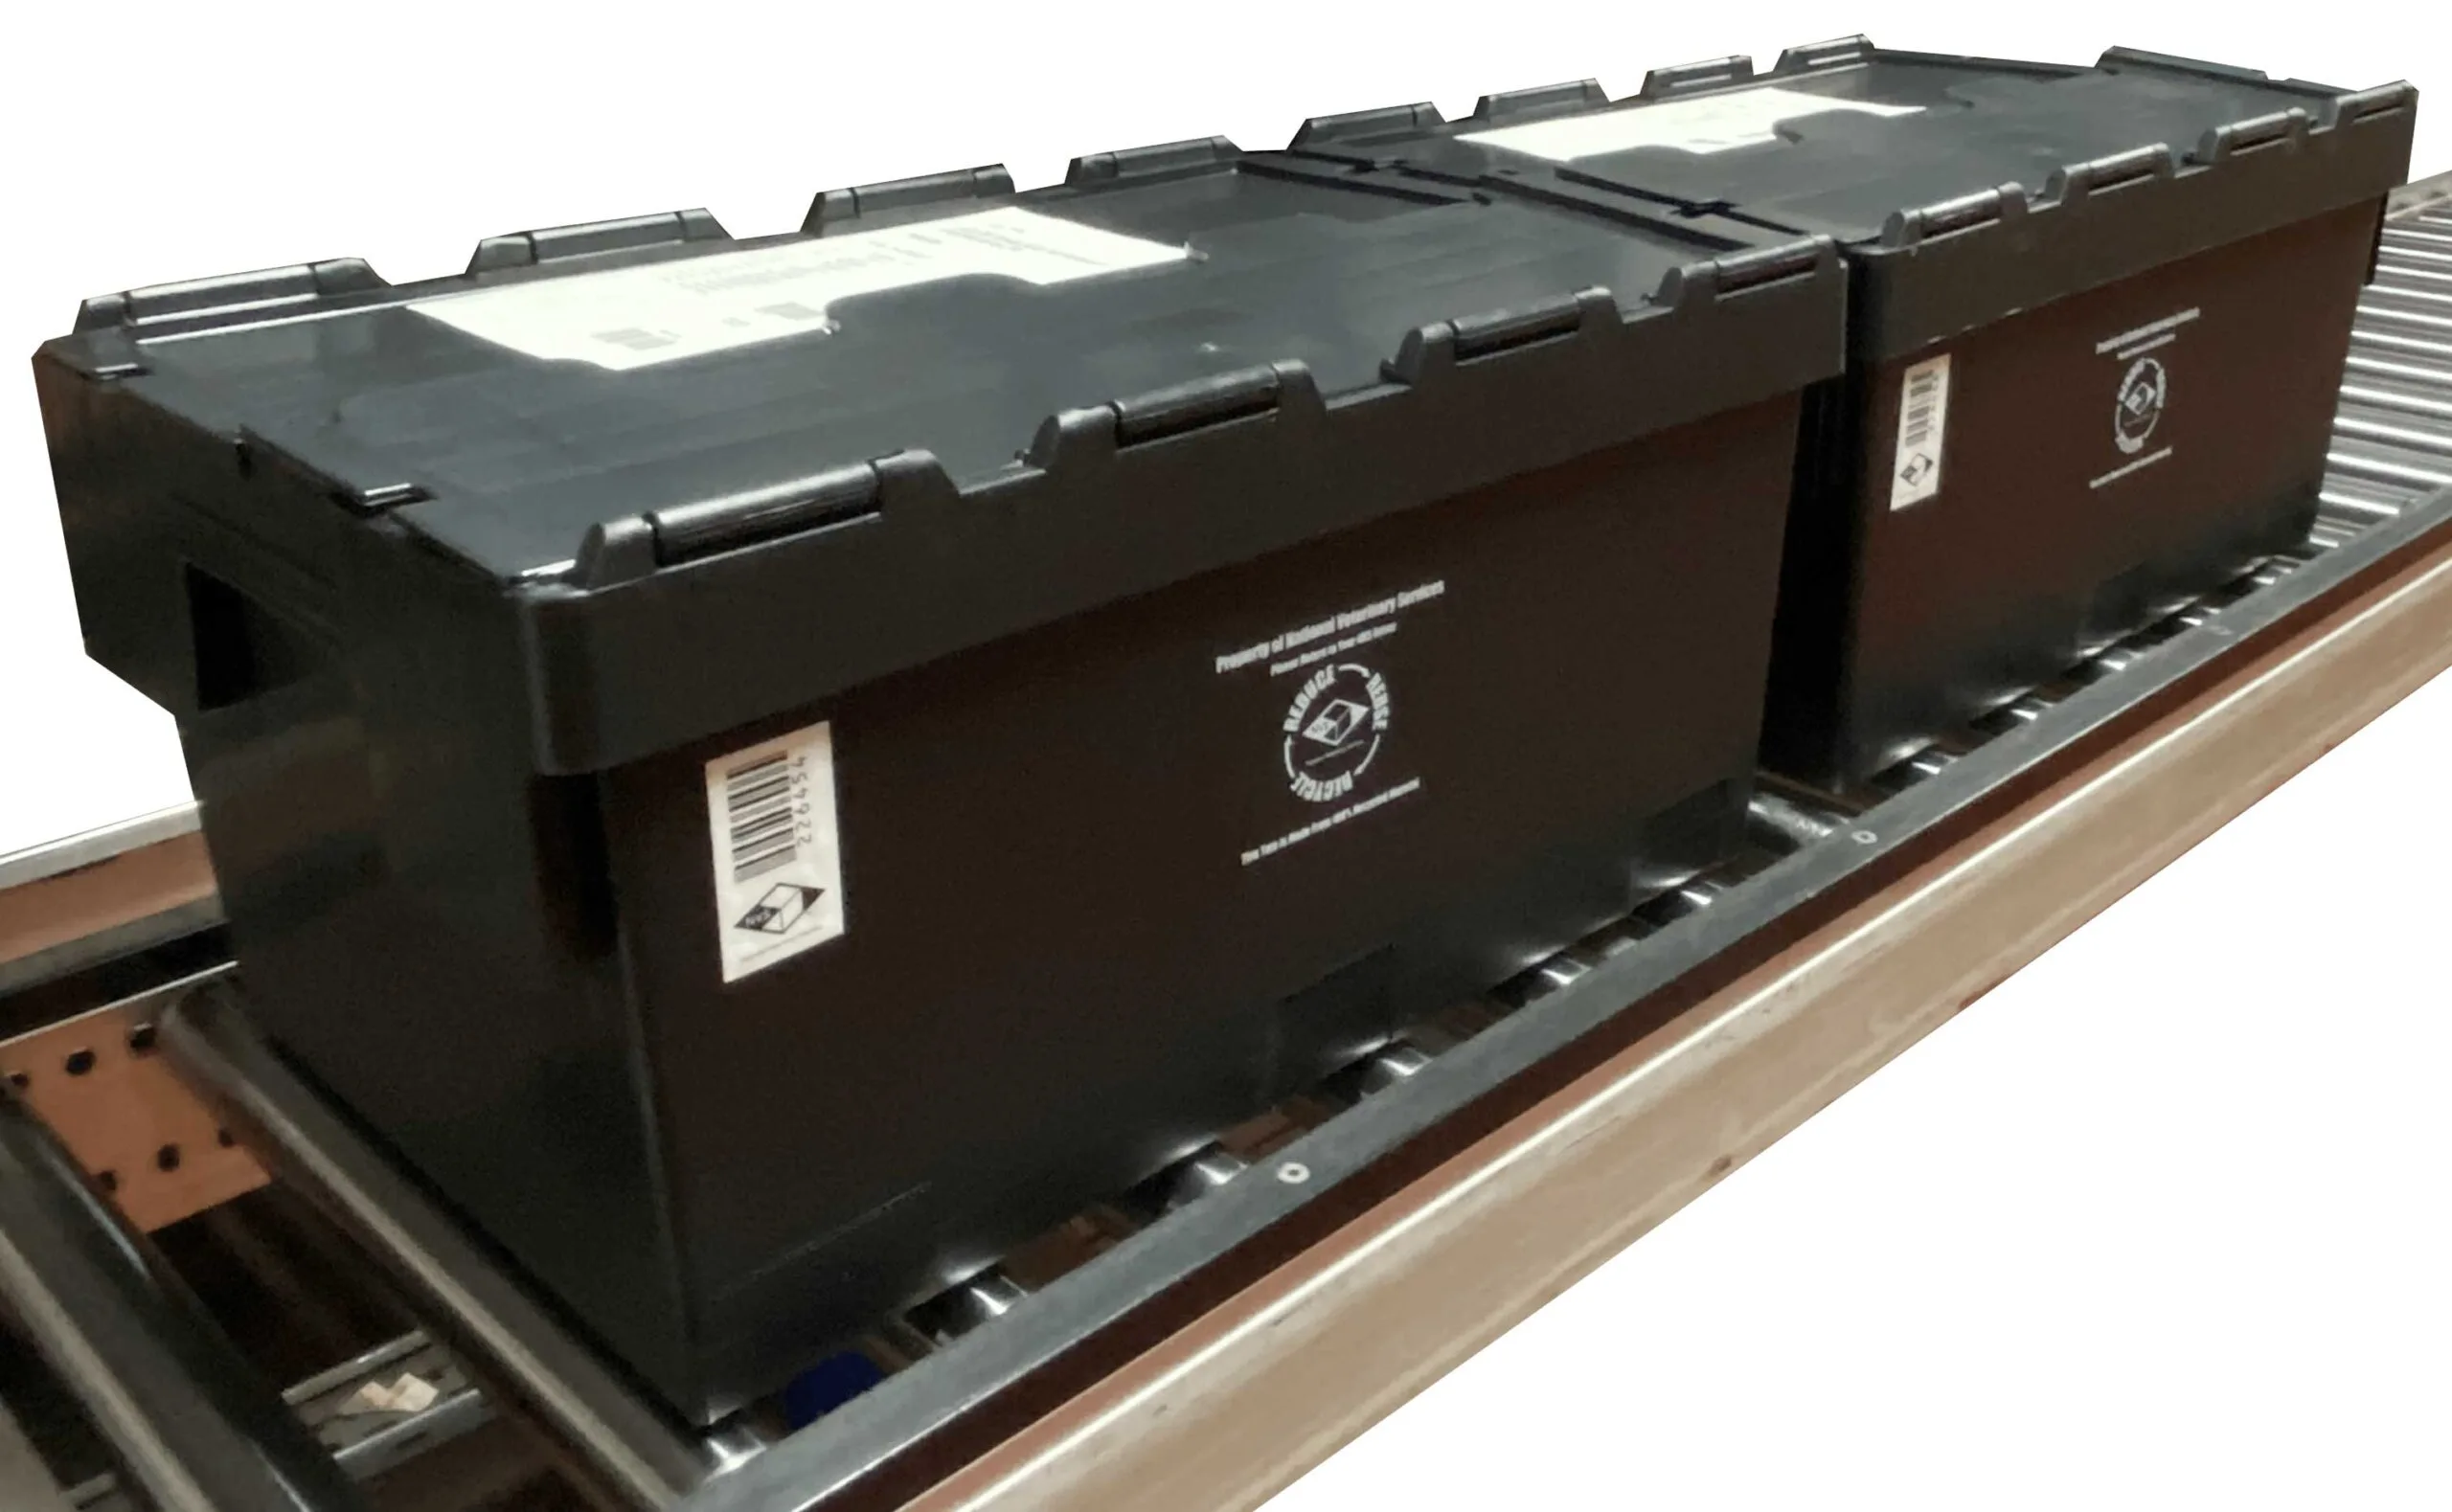 Introducing a new Tote Box Tracking System from NVS